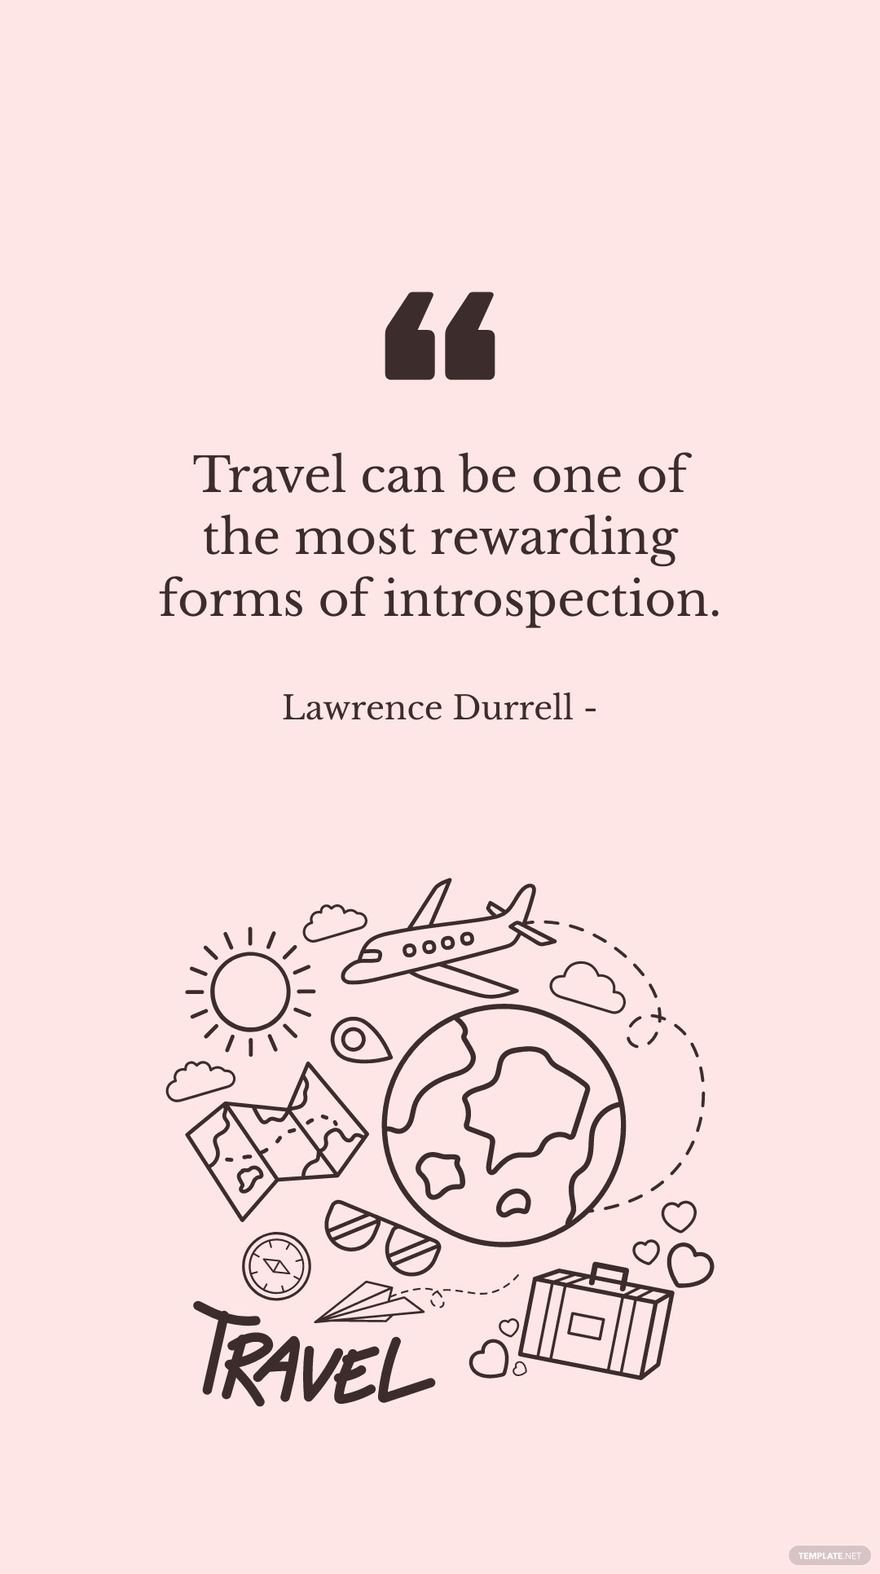 Free Lawrence Durrell - Travel can be one of the most rewarding forms of introspection. in JPG